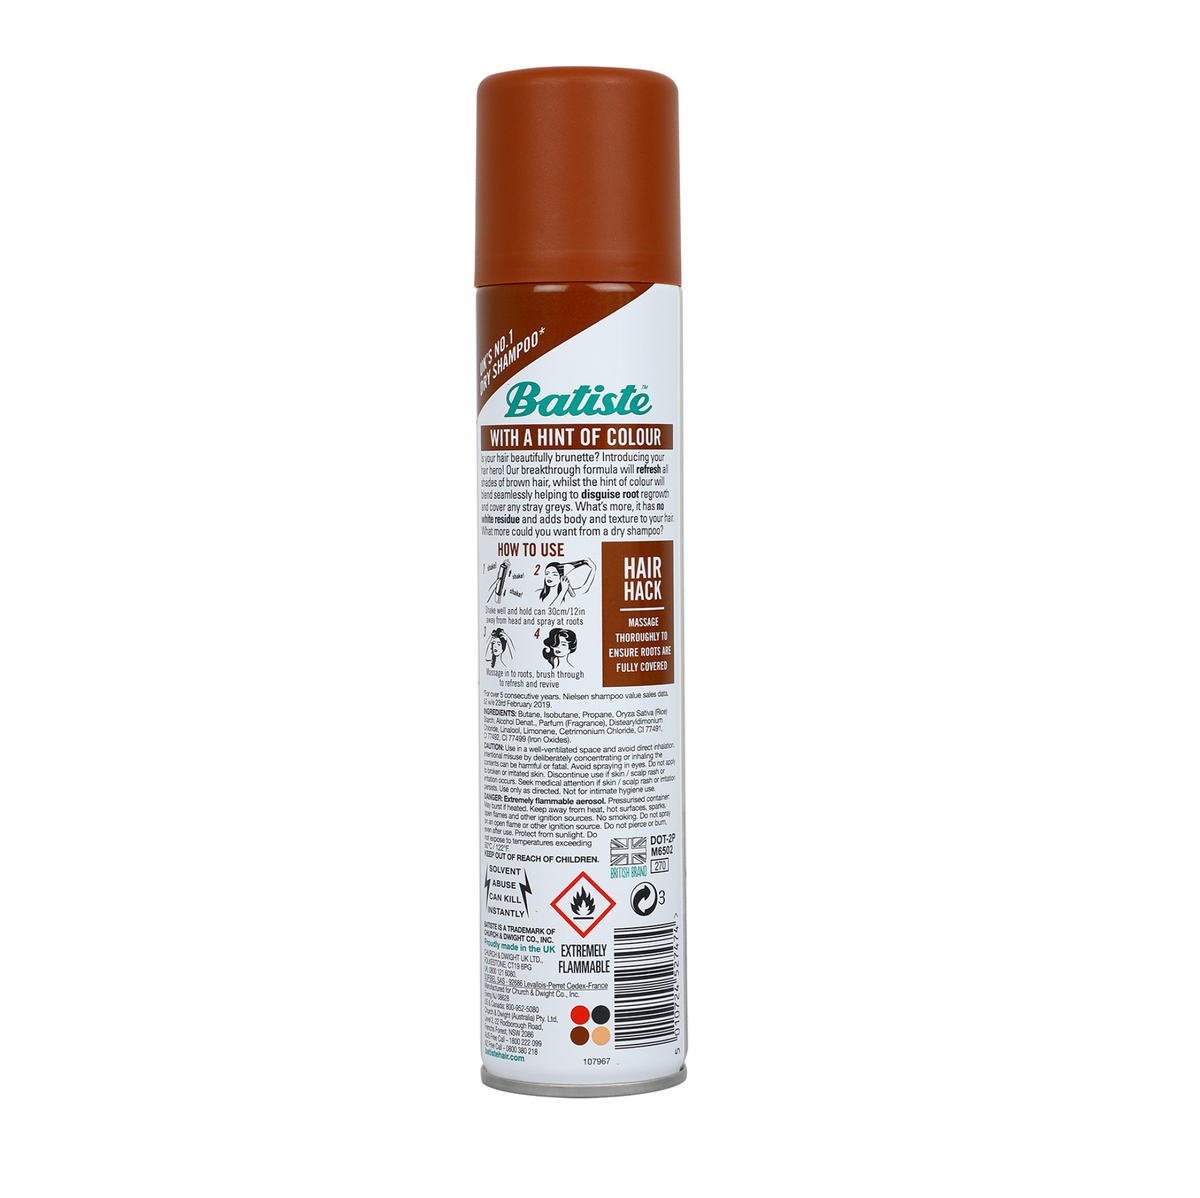 Batiste Instant Hair Refresh, Dry Shampoo and A Hint of Colour for Brunettes, 200 ml